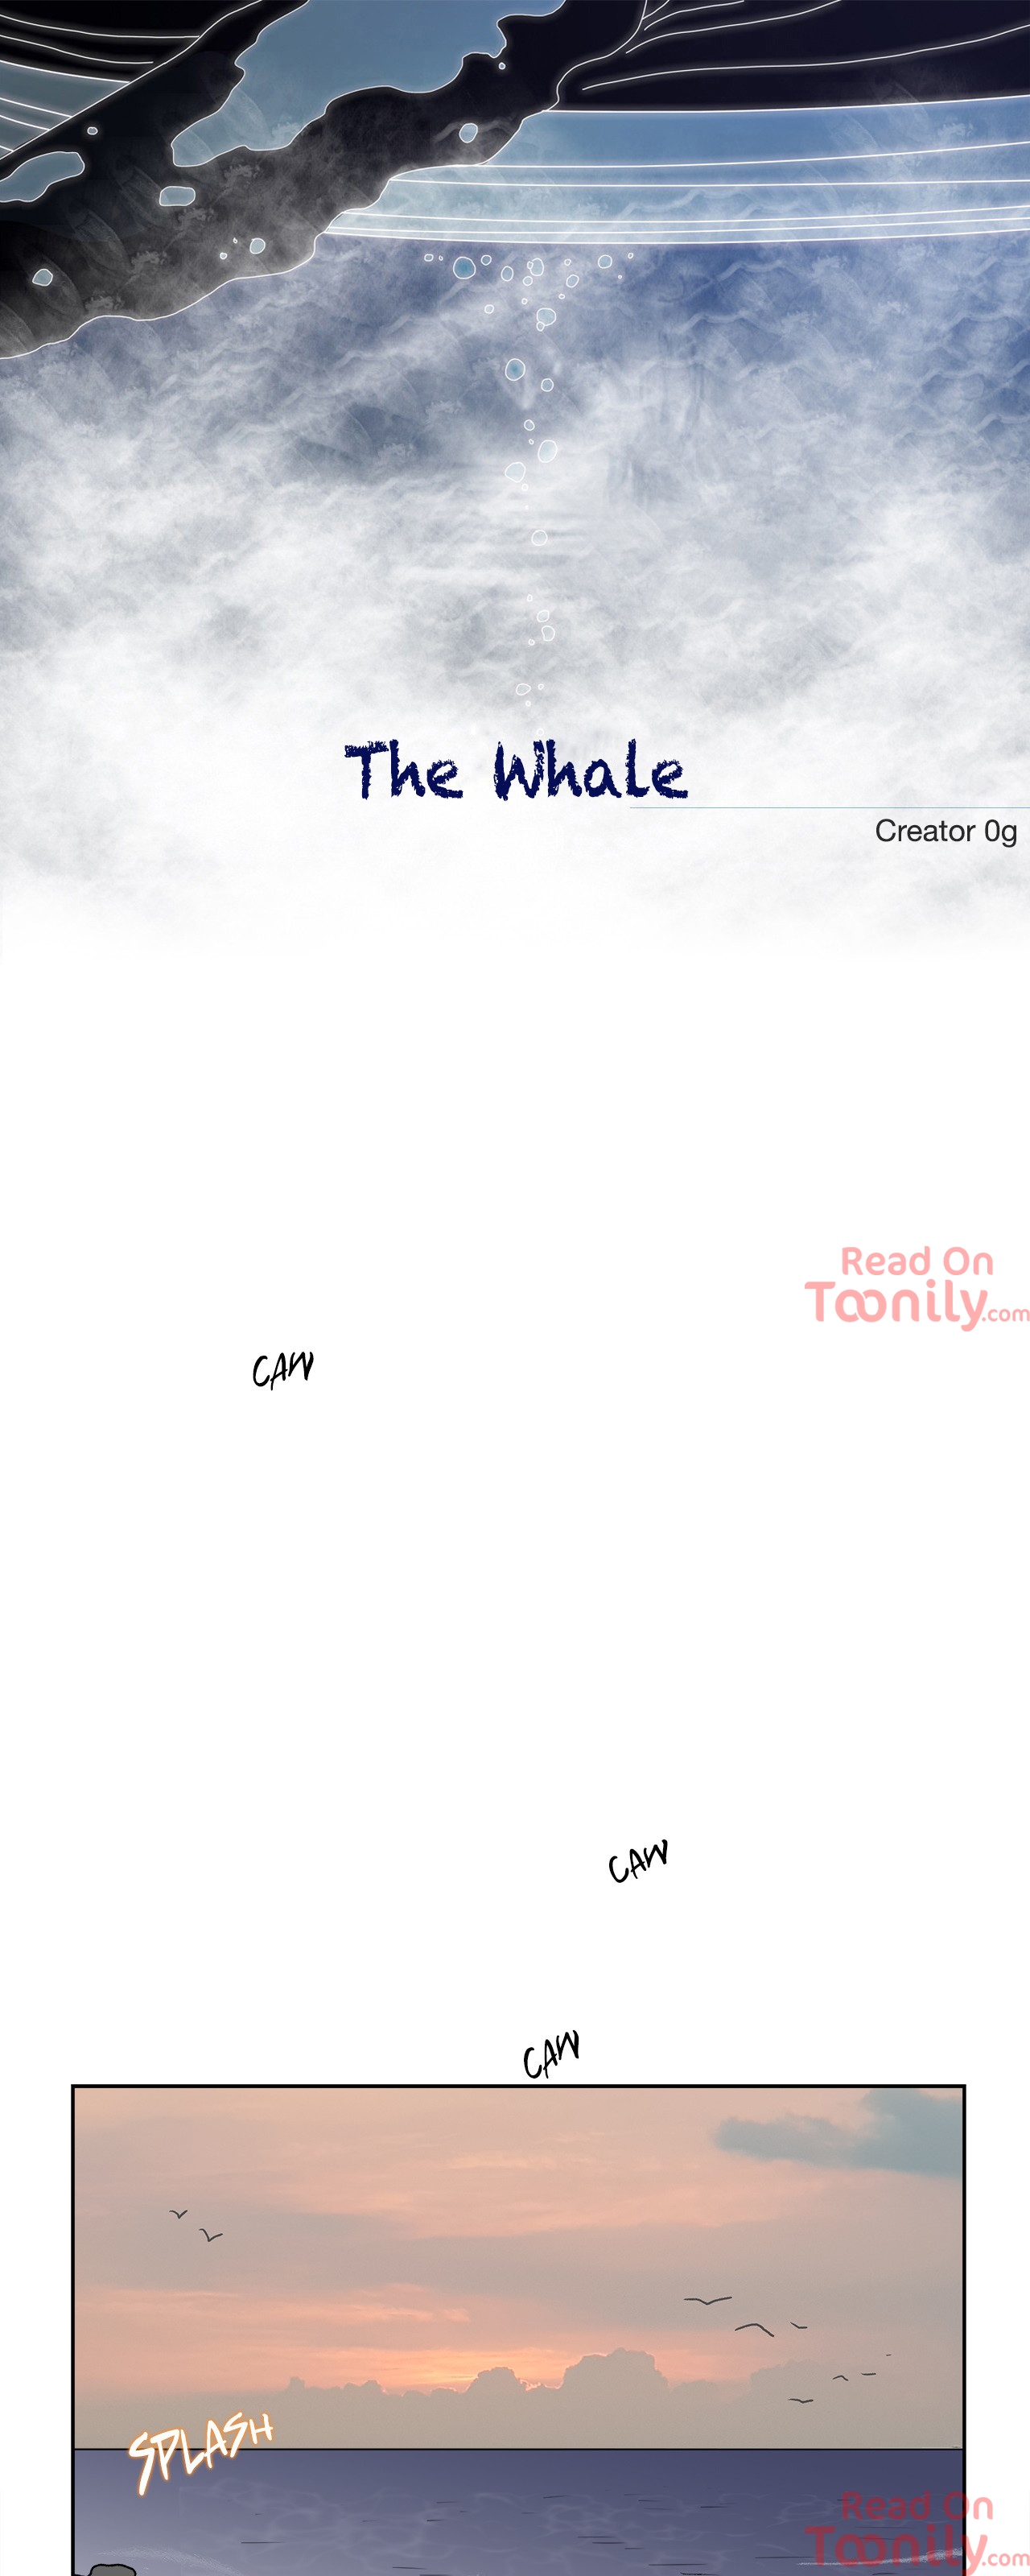 The Whale image